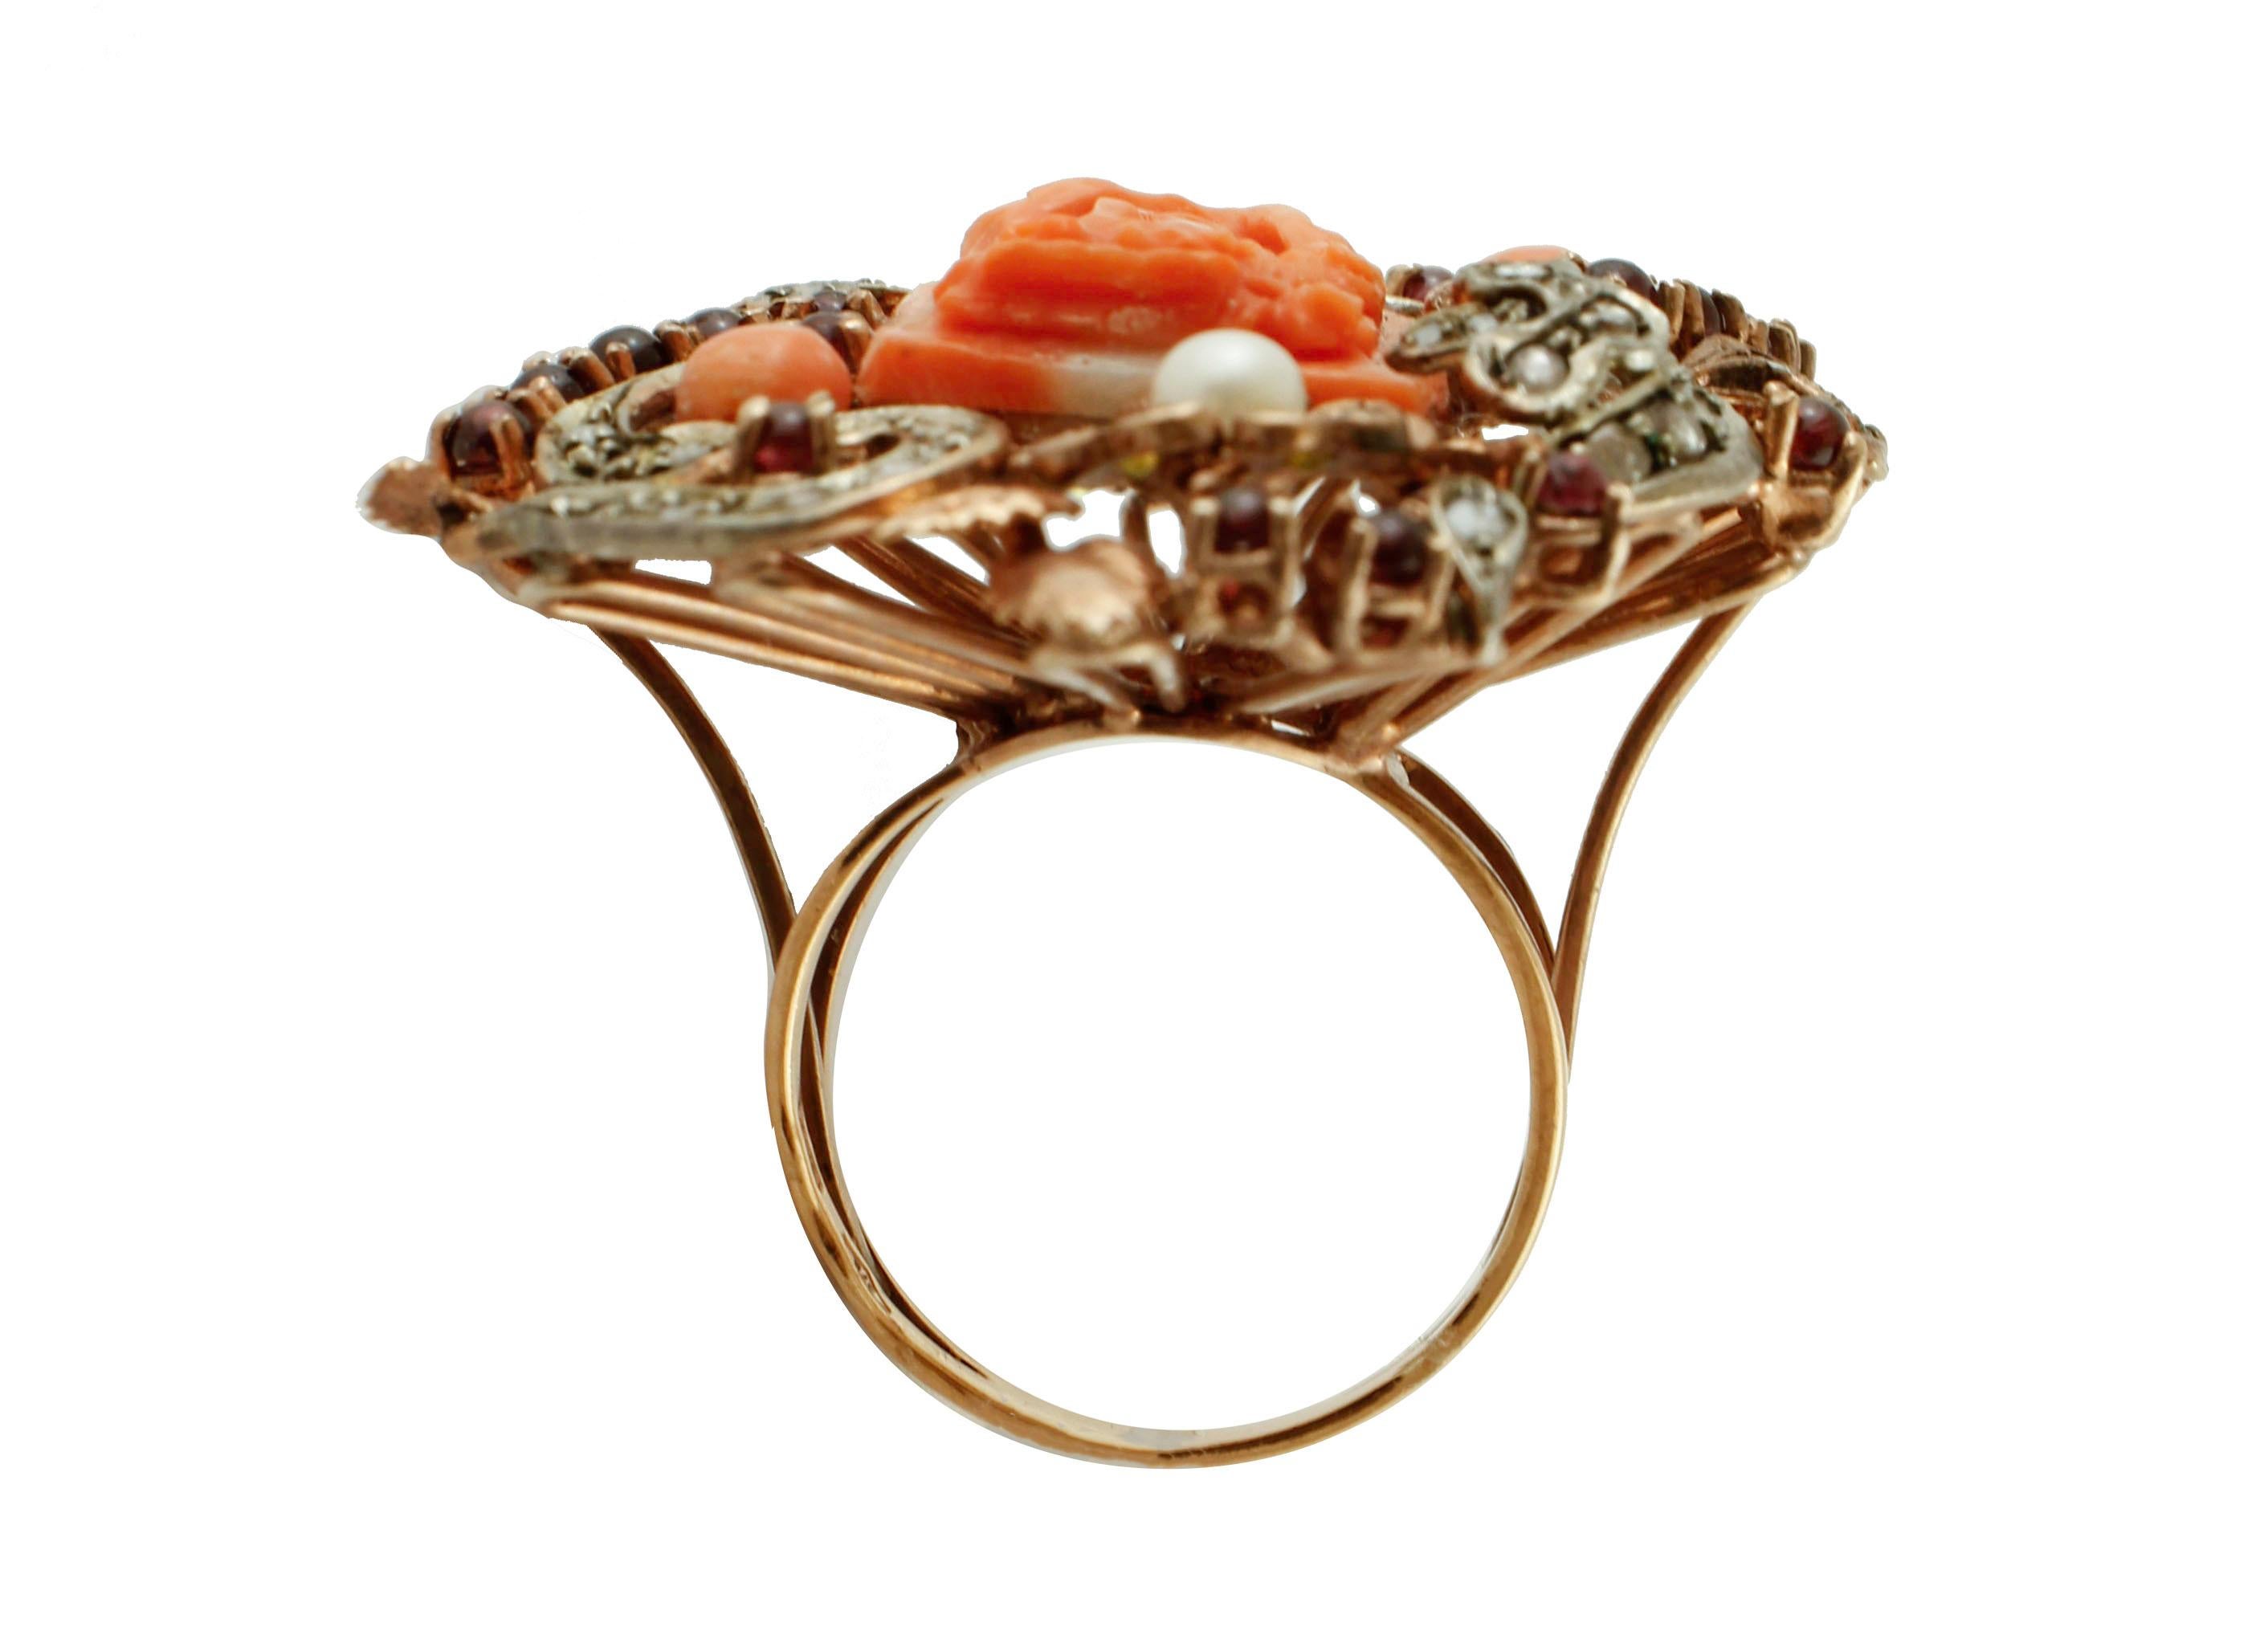 Mixed Cut Diamond, Engraved  Coral, Pearls, Yellow Stones, Garnets, Gold/Silver Ring For Sale